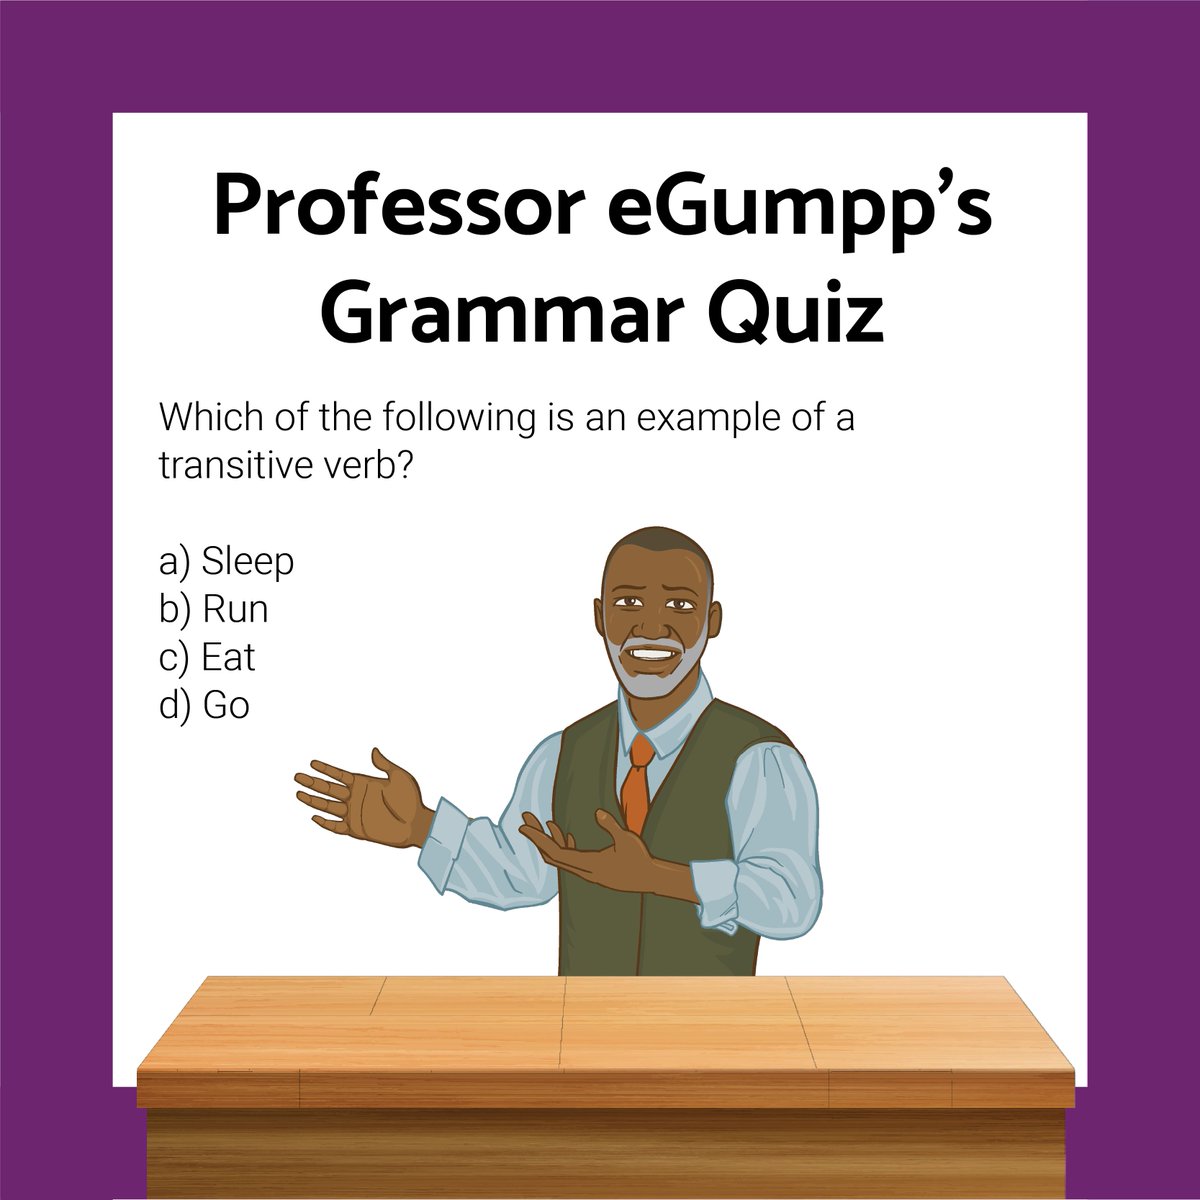 Professor eGumpp’s Grammar Quiz:
Can you identify the transitive verb?
Comment your answer!

#GrammarQuizFriday #Grammar #English #LearnEnglish #EnglishGrammar #EnglishLanguage #EnglishClass #EnglishOnline #EnglishQuiz #GrammarQuiz #EGUMPP